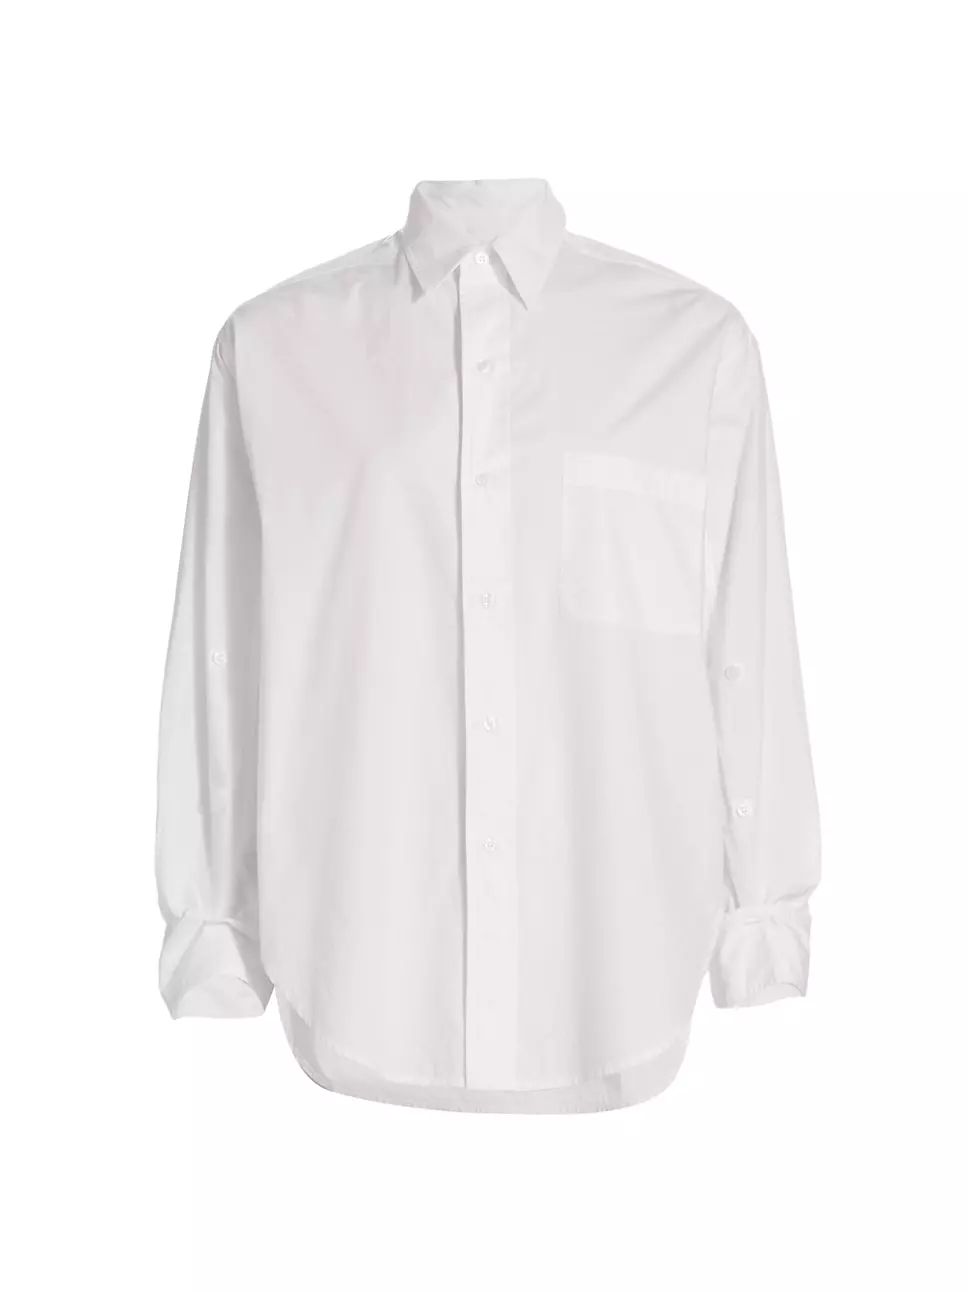 Citizens of Humanity Kayla Button-Up Shirt | Saks Fifth Avenue